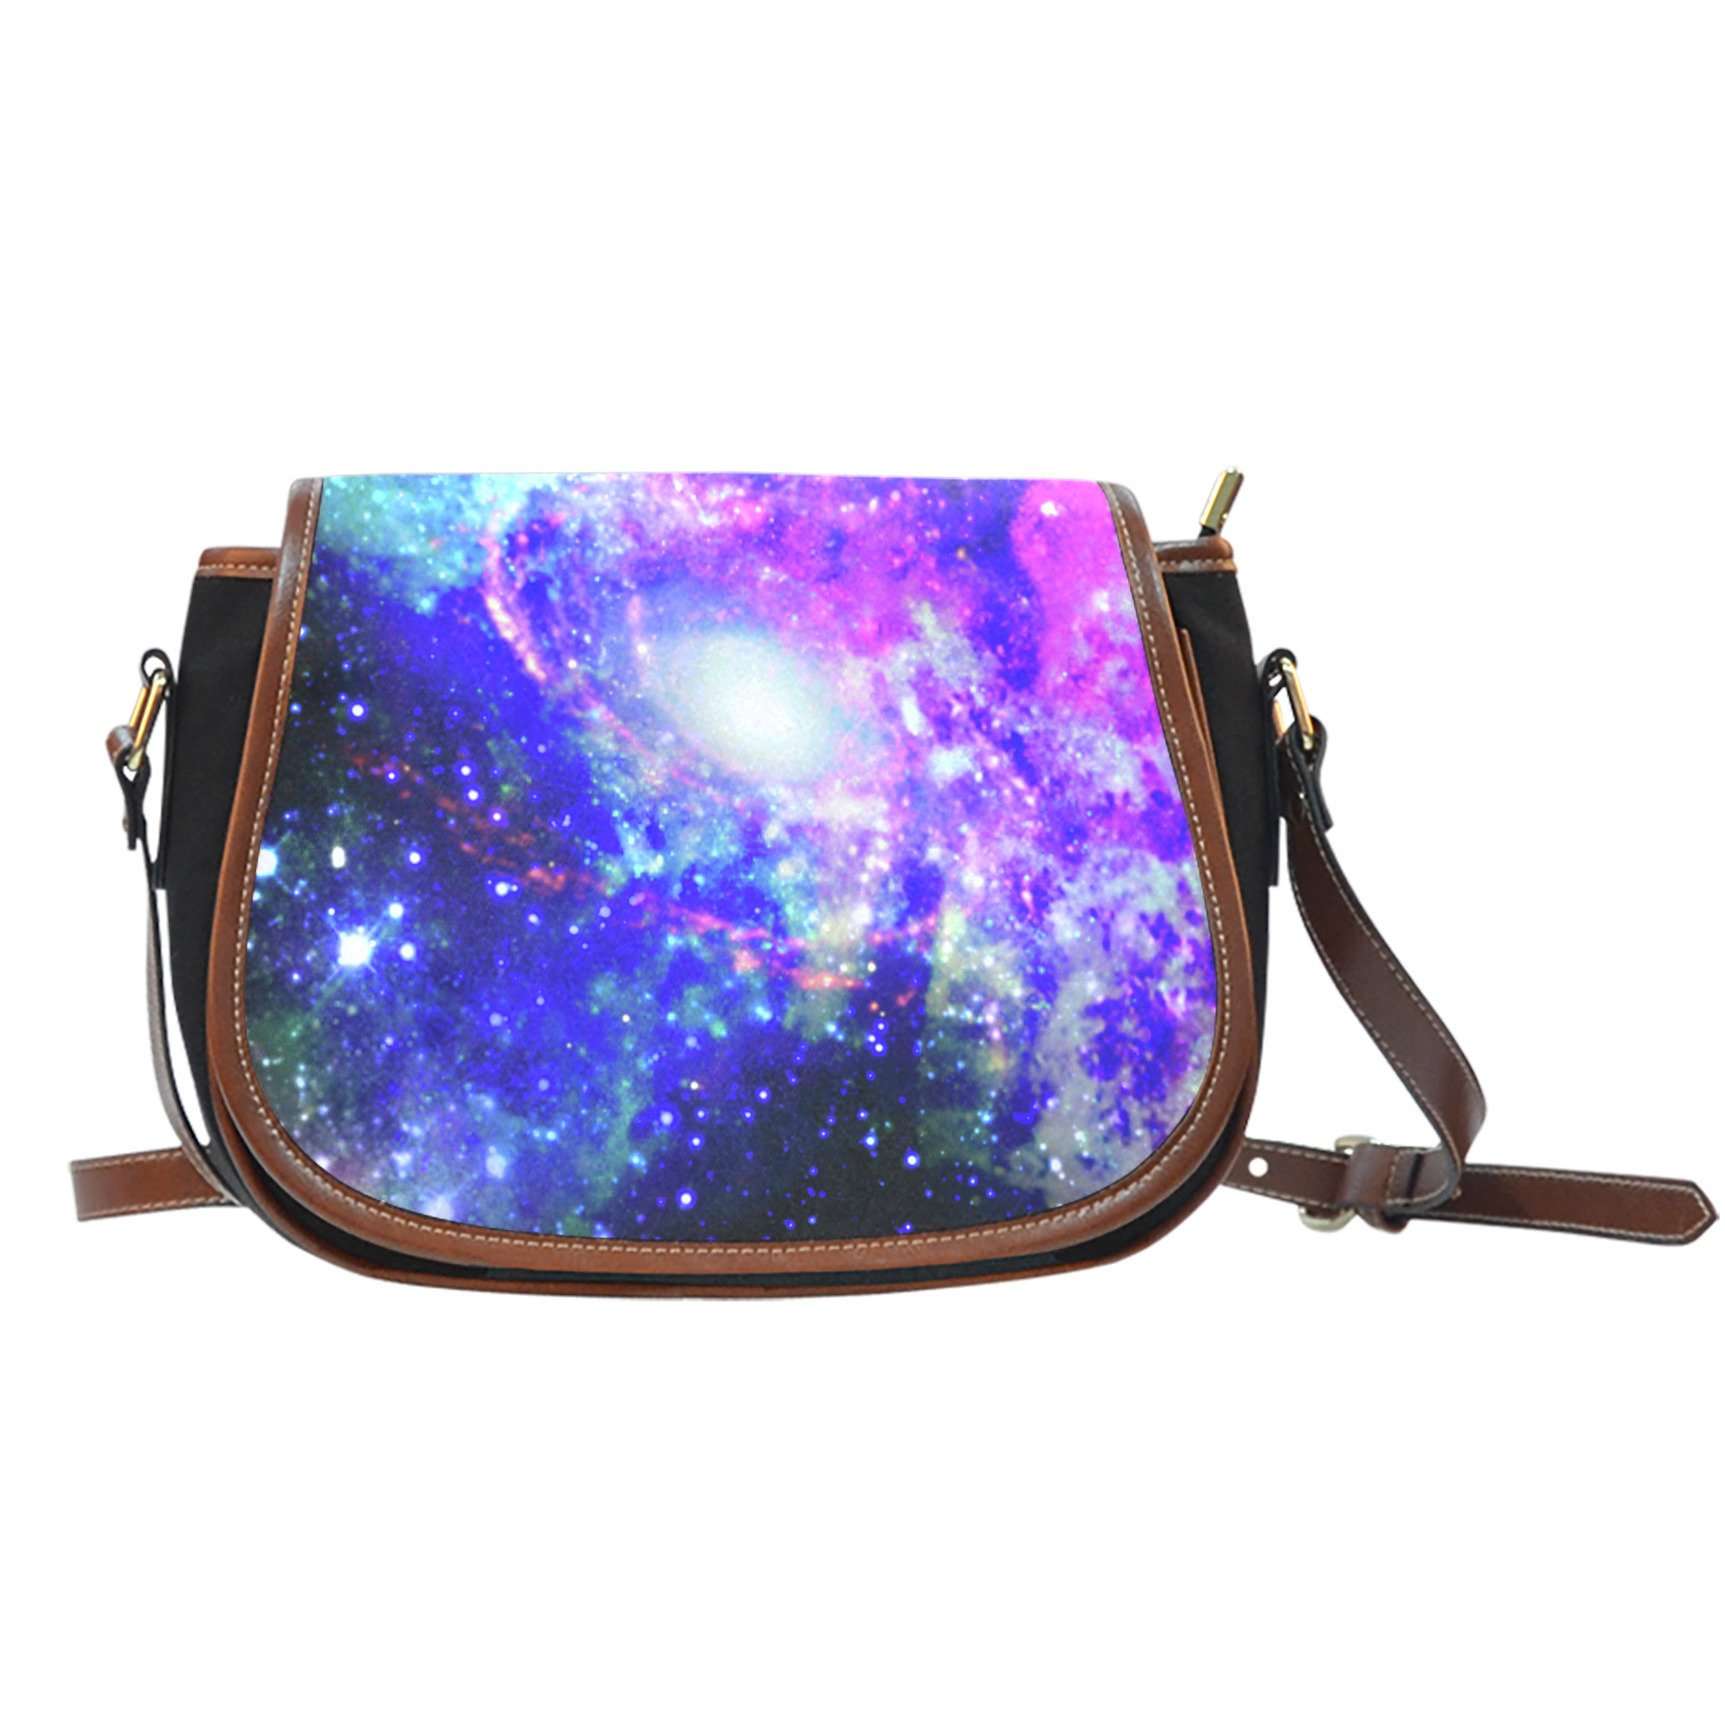 Galaxy 1 Crossbody Shoulder Canvas Leather Saddle Bag - STUDIO 11 COUTURE